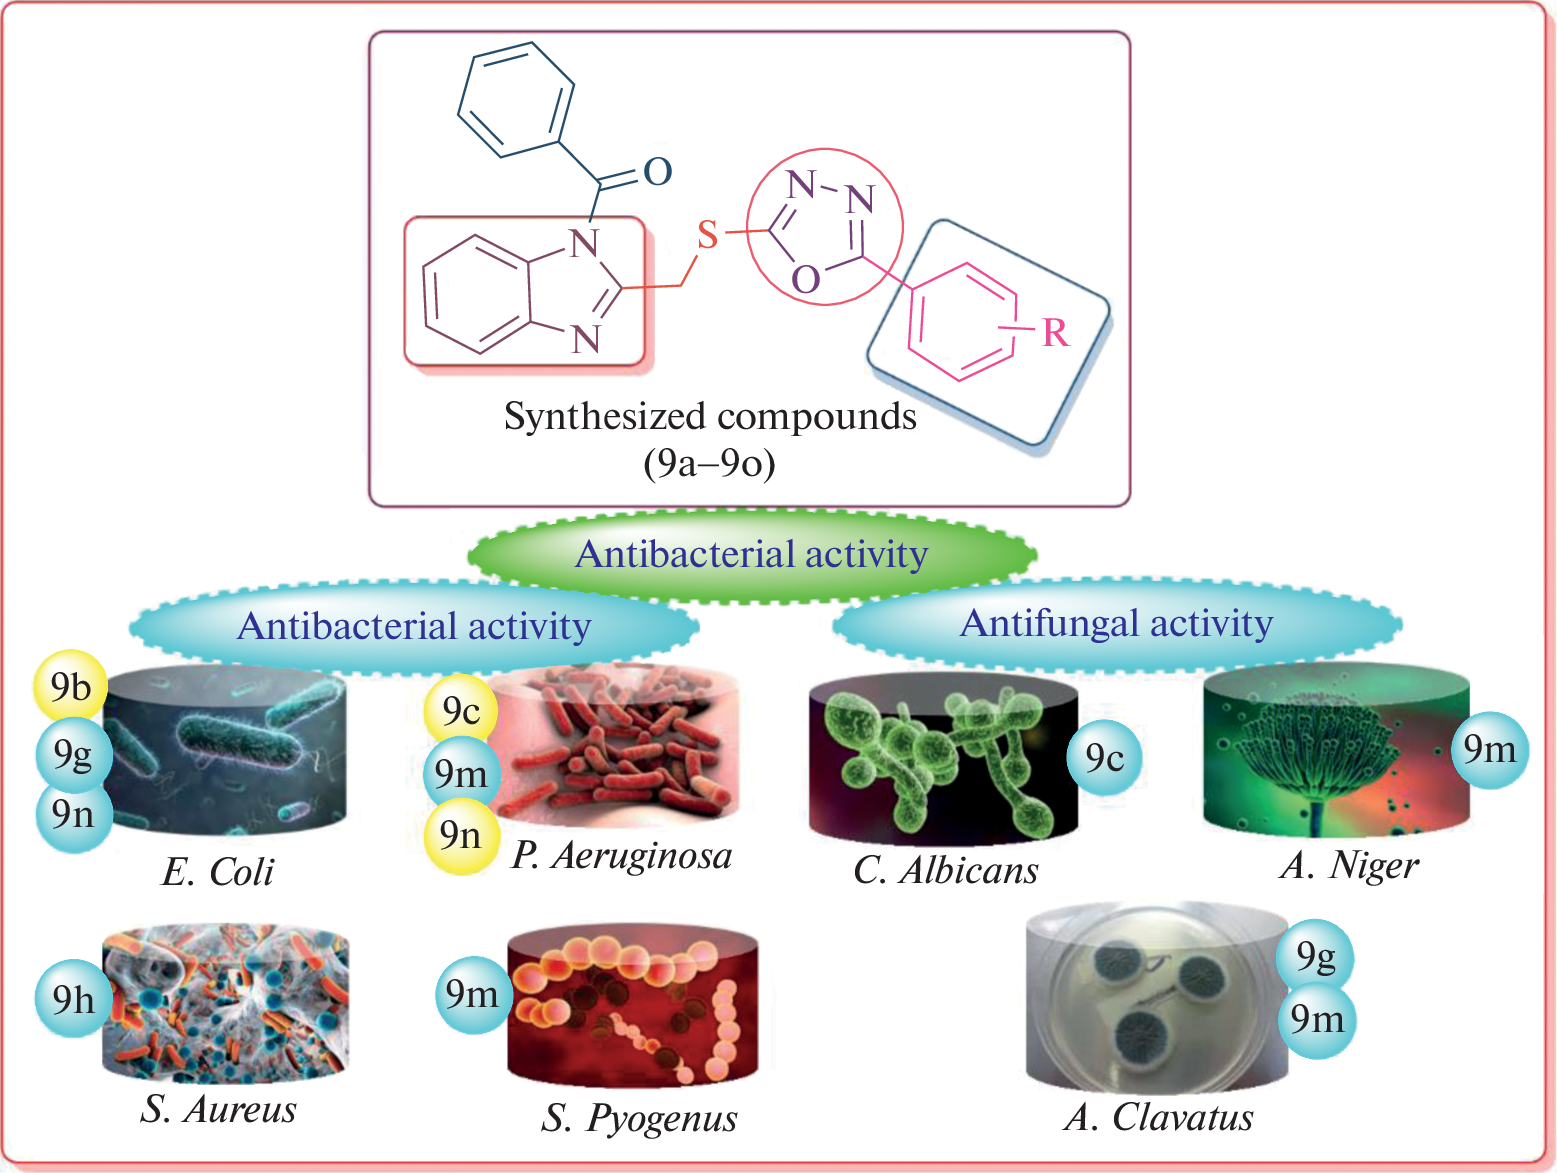 Synthesis and Biological Evaluation Studies of Novel 1,3,4-Oxadiazole and Benzo[d]imidazole Scaffolds as Promising Antimicrobial Agents